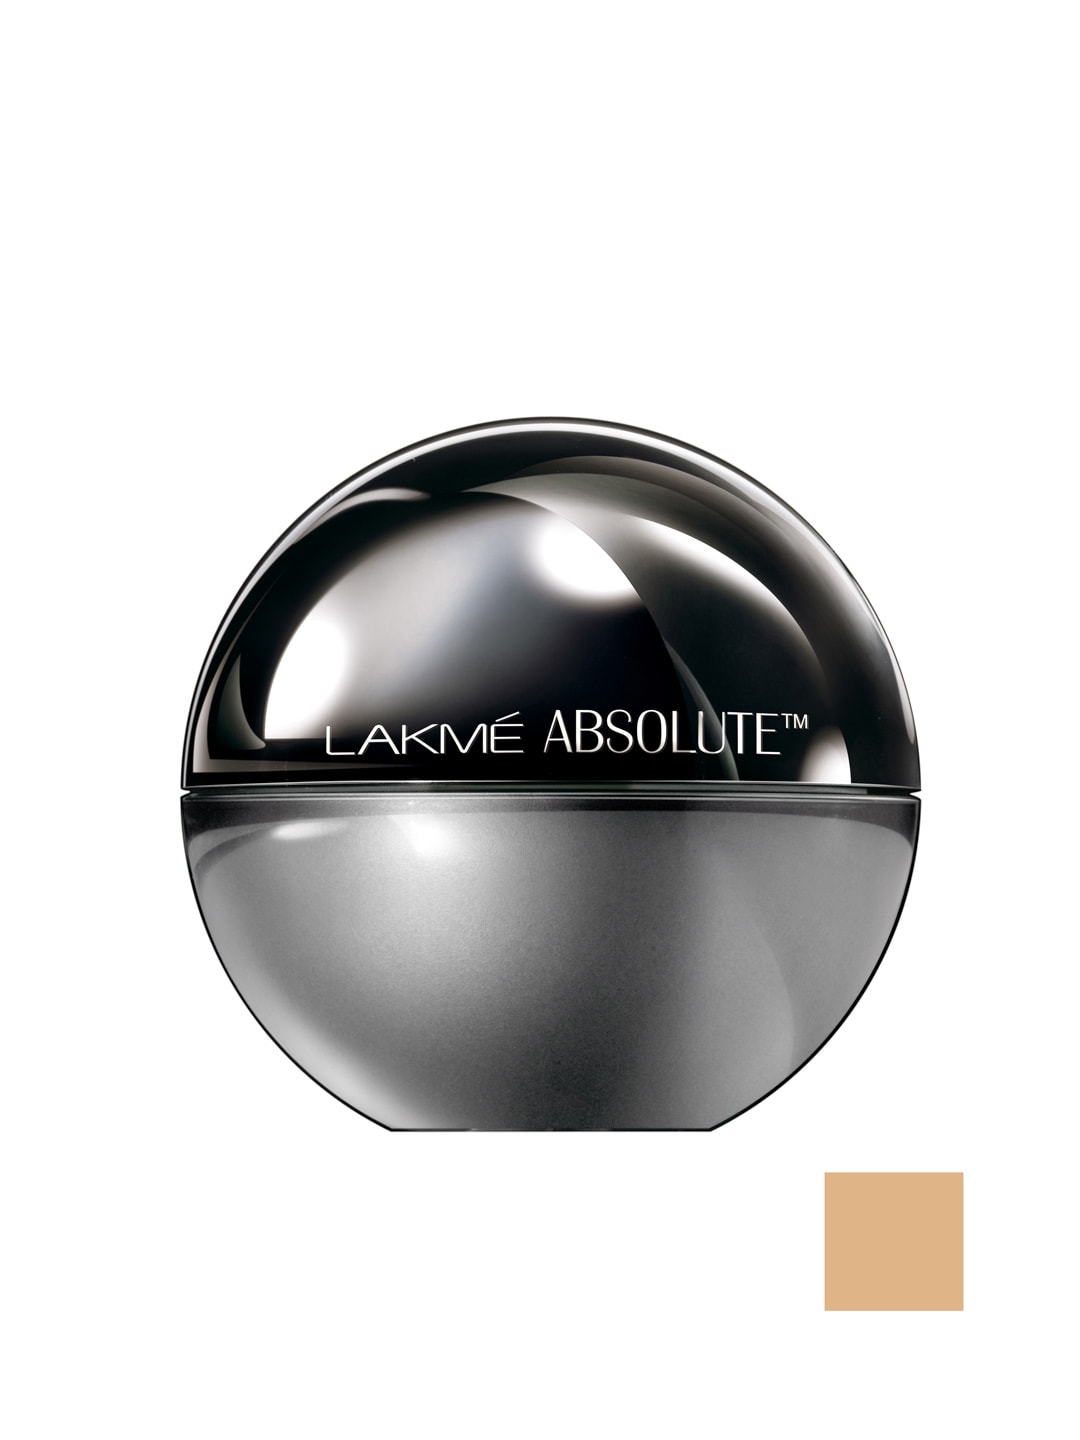 Lakme Absolute Mattreal Skin Natural Mousse with SPF 8 - Ivory Fair Price in India